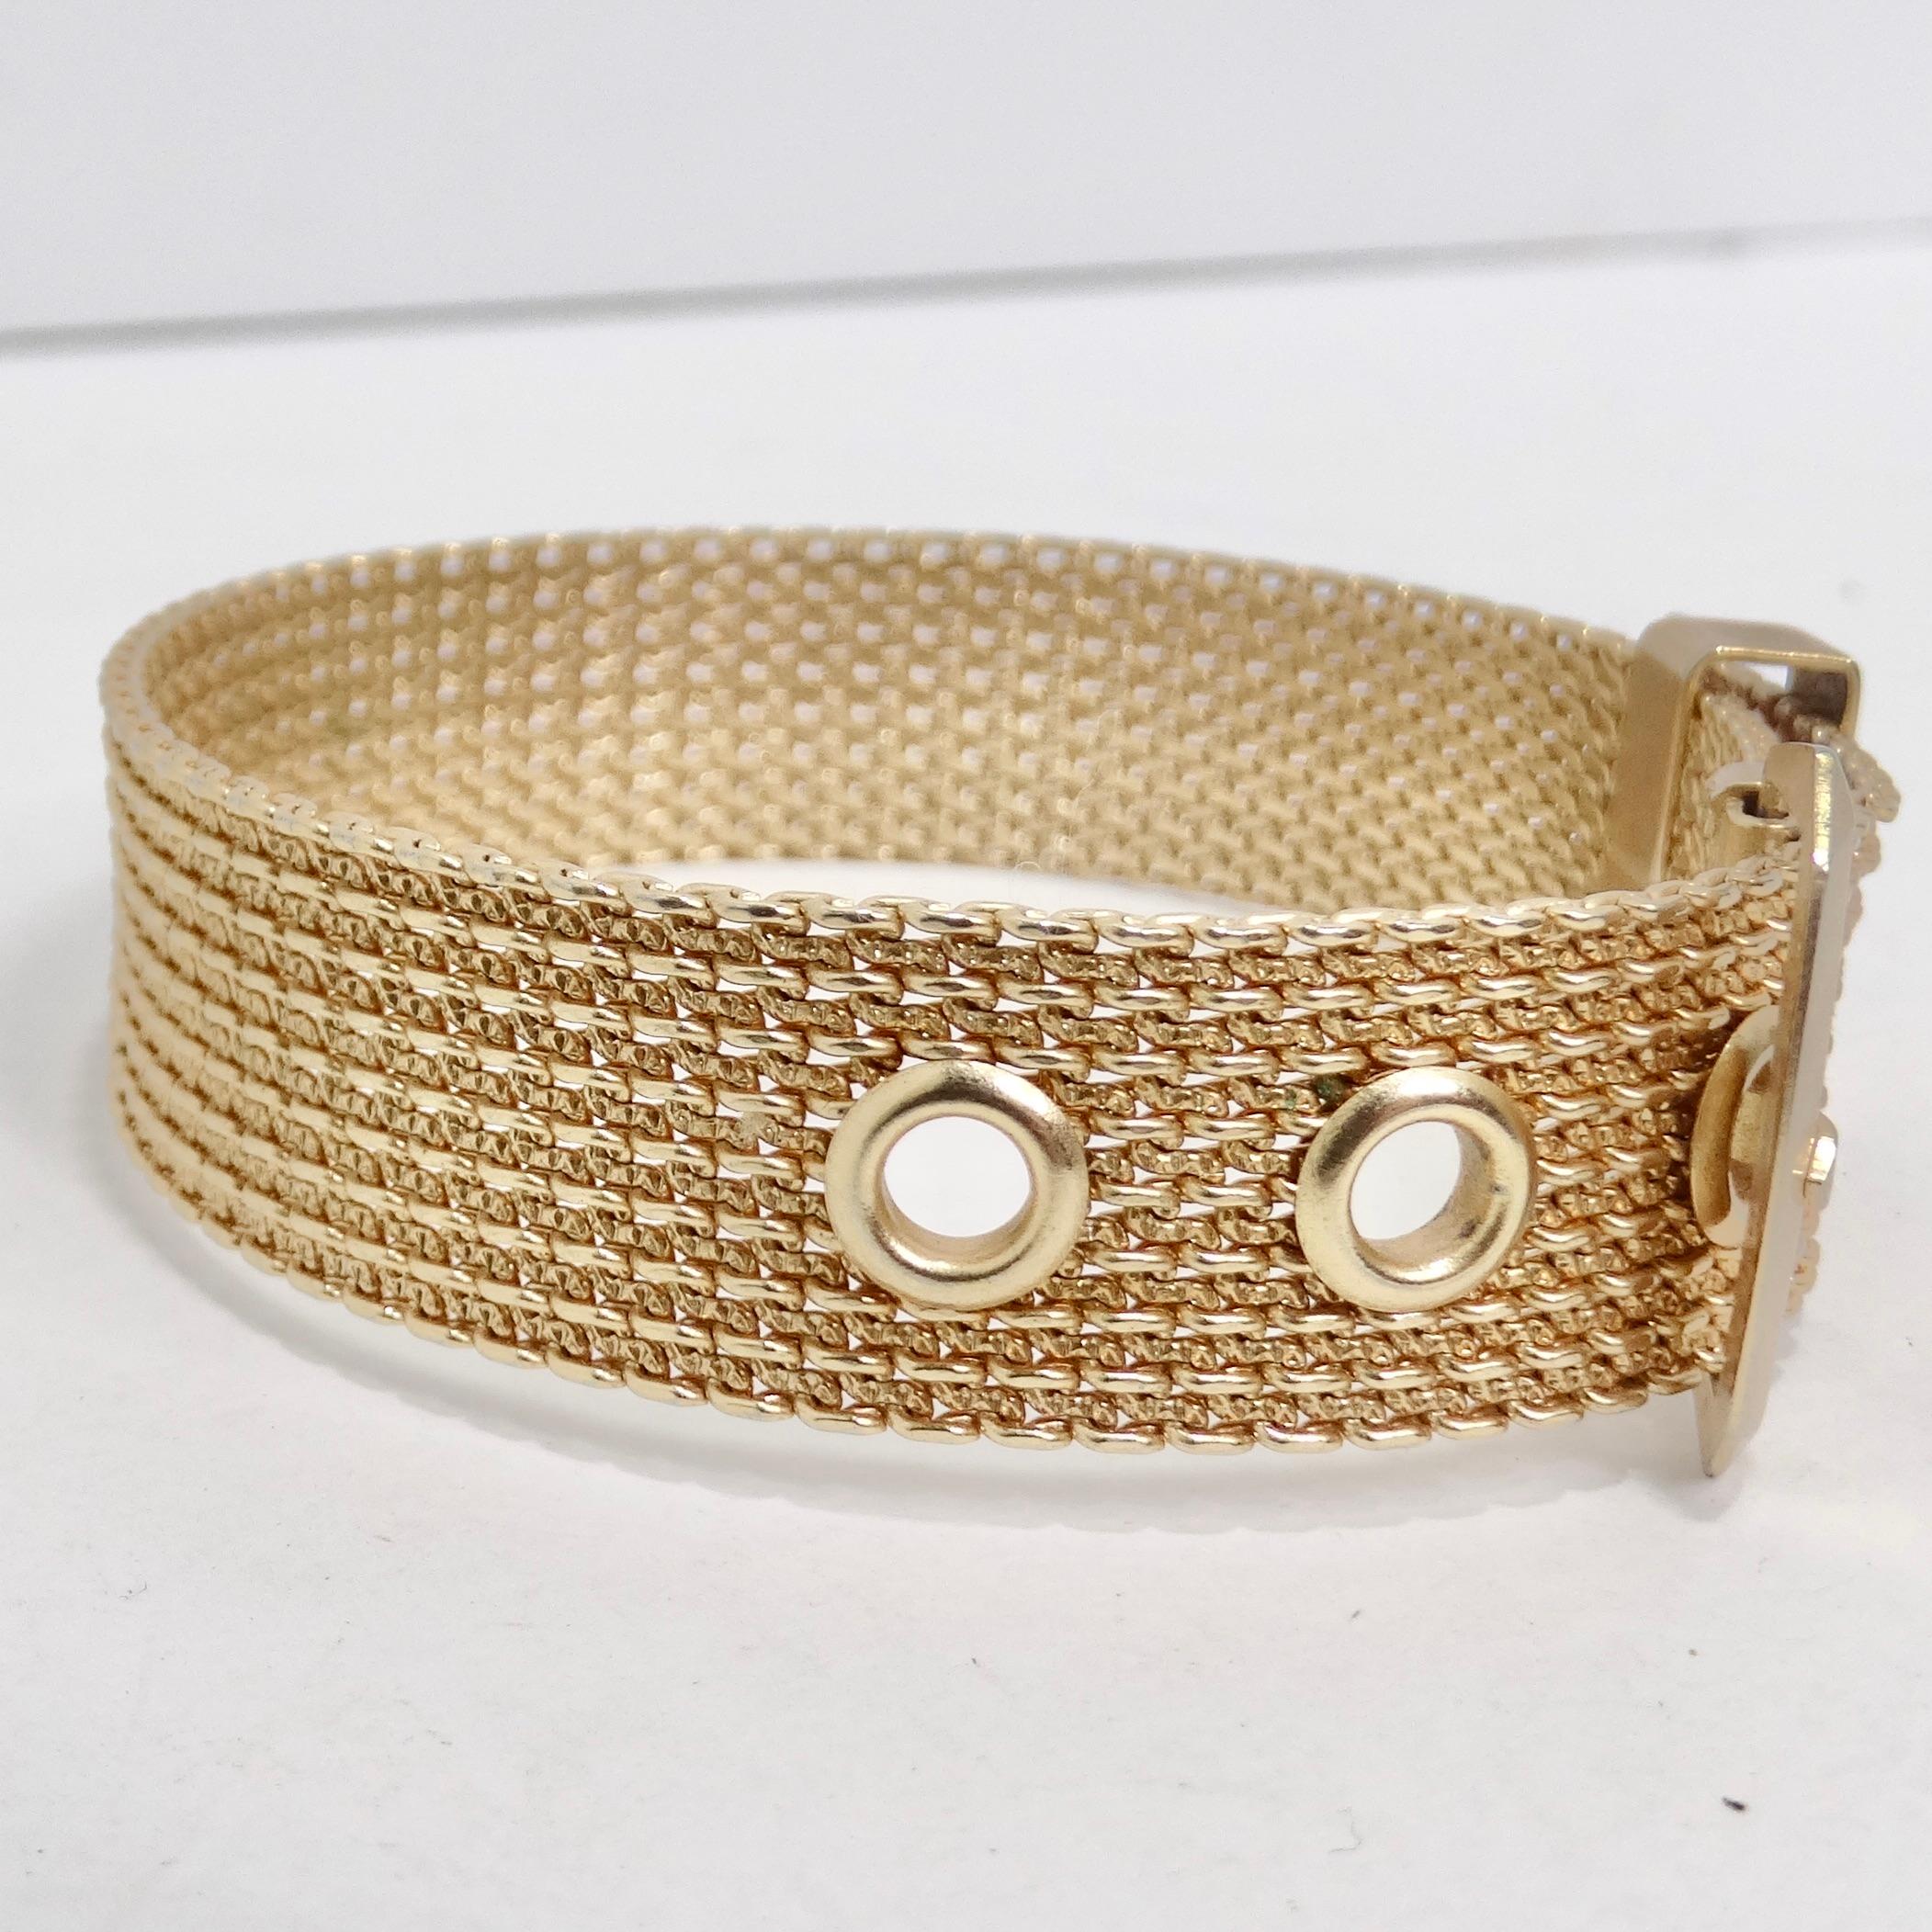 Introducing the 14K Gold Plated Belt Bracelet, a timeless piece that effortlessly combines classic design with modern versatility. Crafted in the 1980s, this exquisite bracelet features a belt buckle motif and a mesh-effect 14K gold plating, making